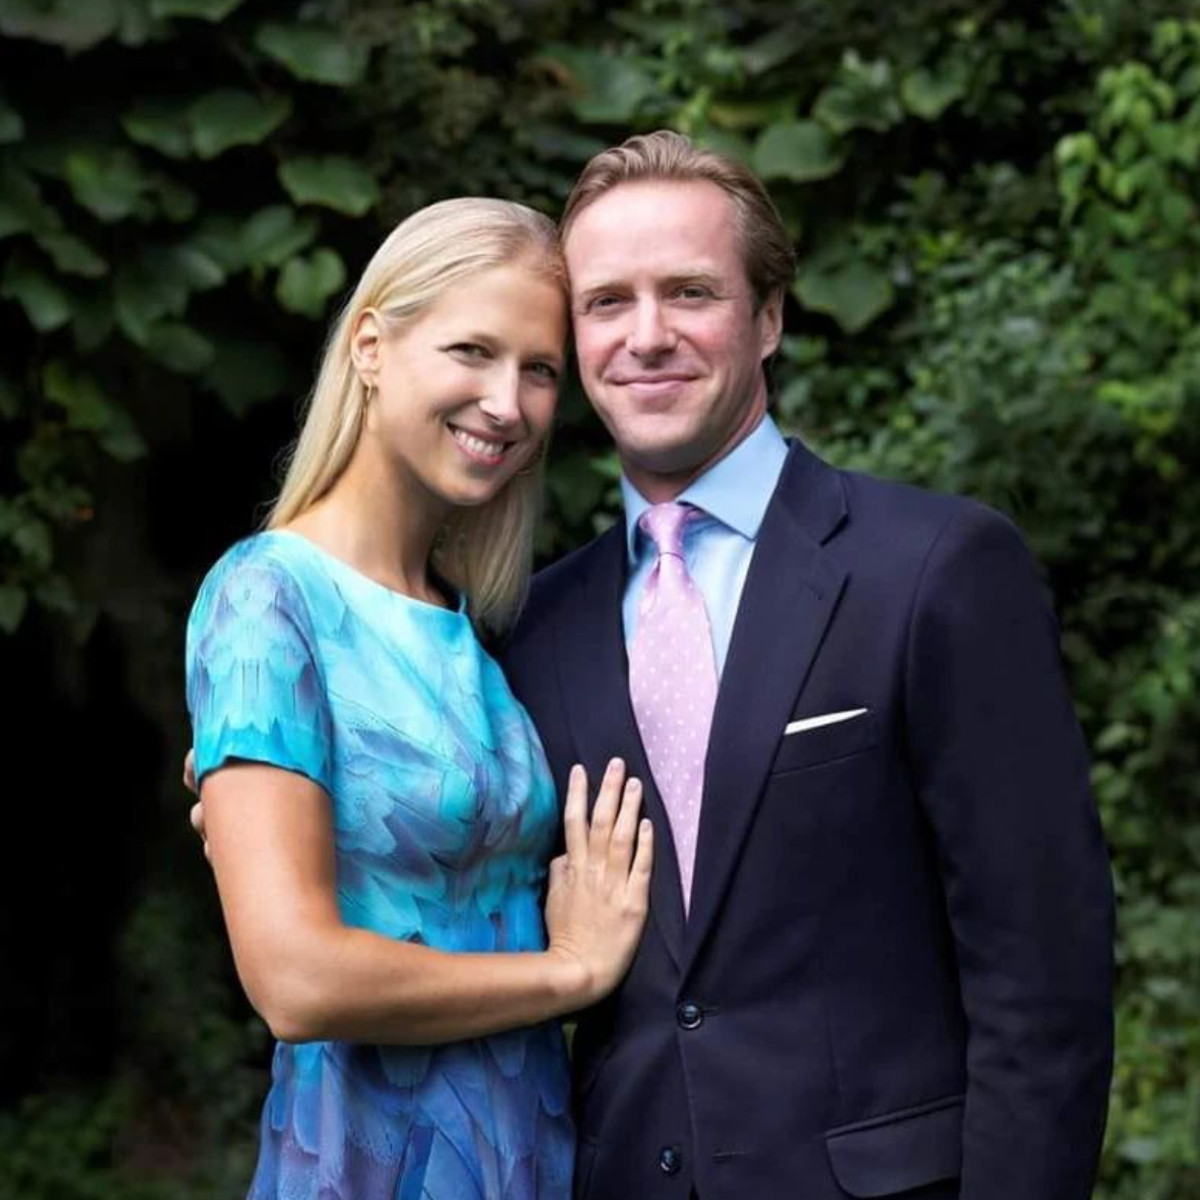 Thomas Kingston, husband of 56th in line to the throne Lady Gabriella Windsor, has died unexpectedly at the age of 45. Photo: @a_royal_obsession/Instagram 